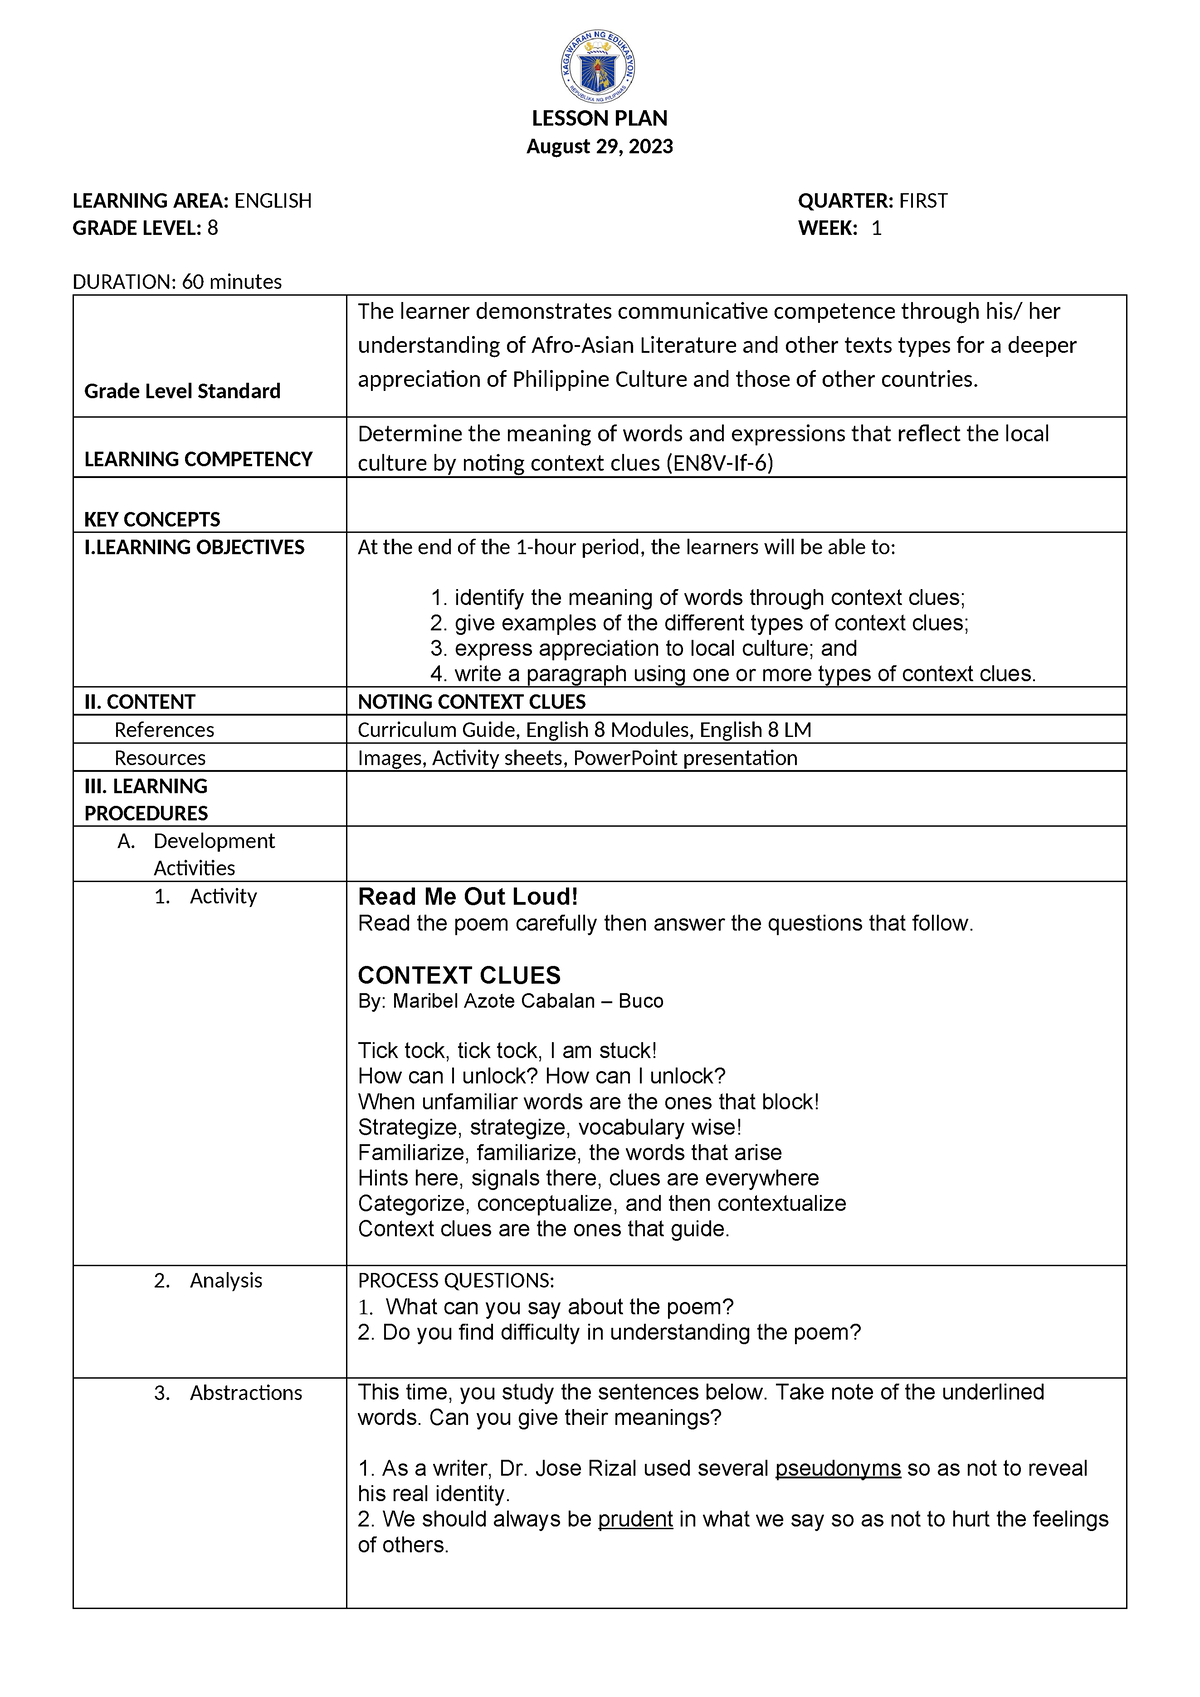 English Week 1 Day 1 Lesson Plan Lesson Plan August 29 2023 Learning Area English Quarter 3704